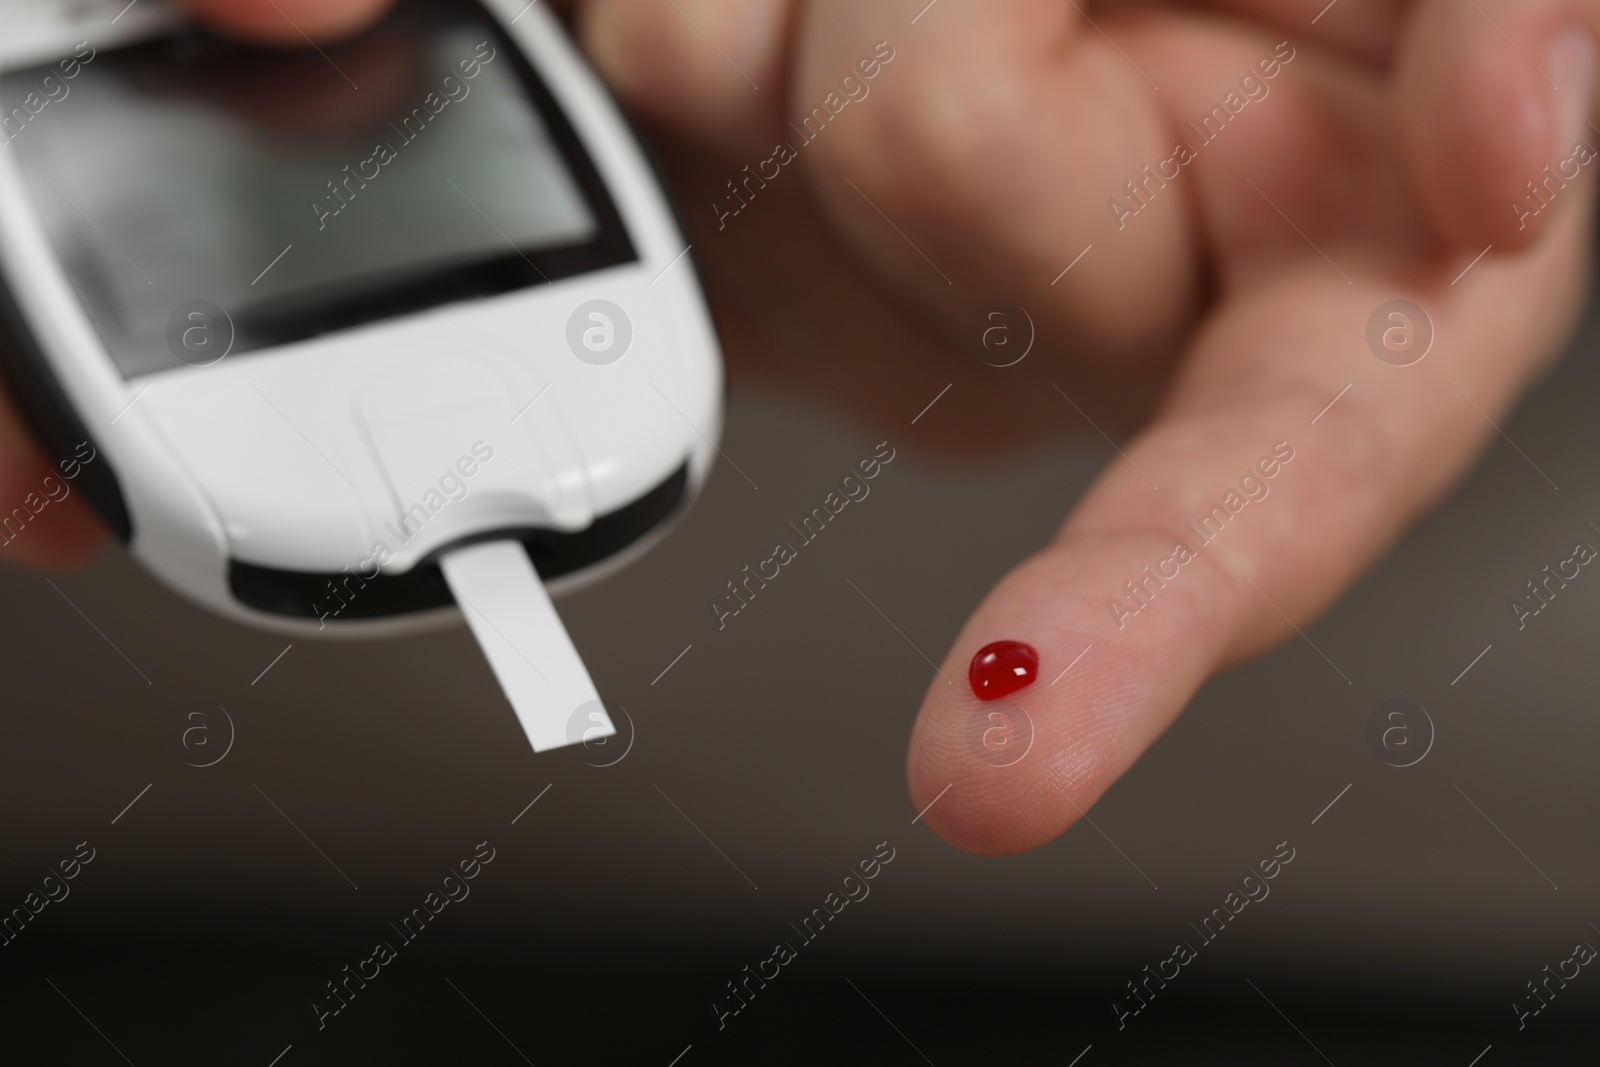 Photo of Diabetes test. Man checking blood sugar level with glucometer on blurred background, closeup